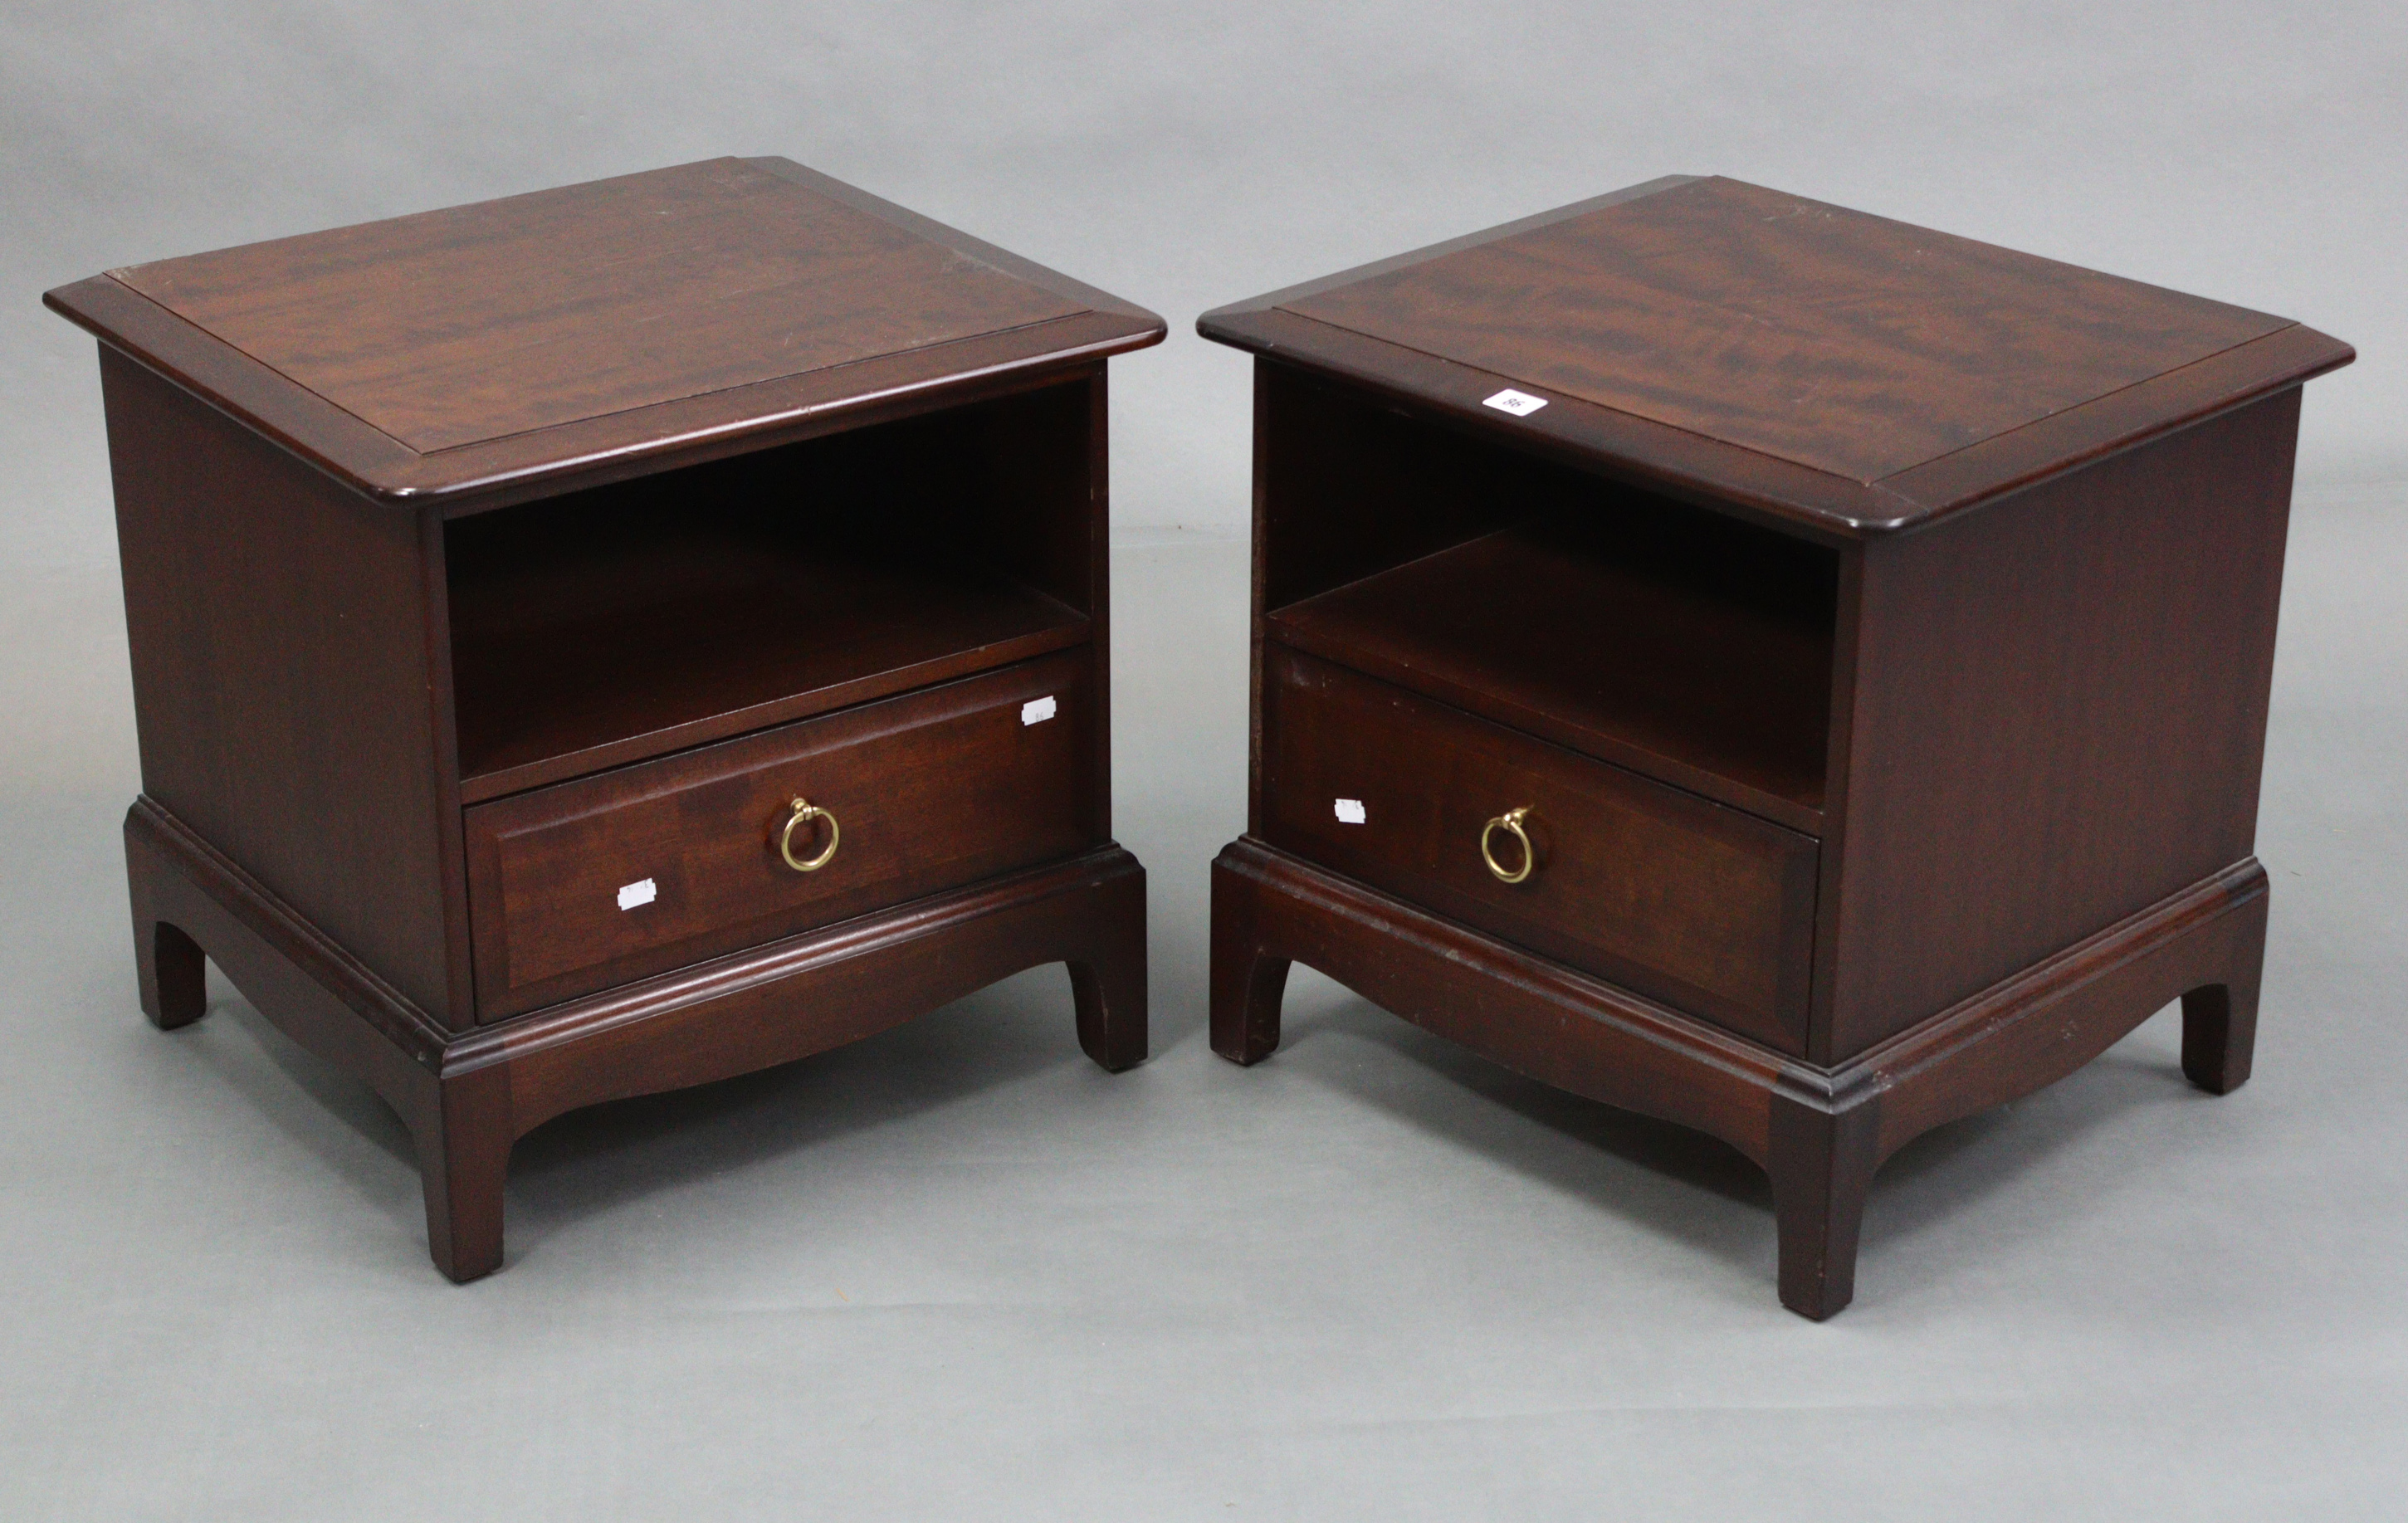 A pair of Stag “Minstrel” mahogany-finish bedside cabinets, each with open recess above a long